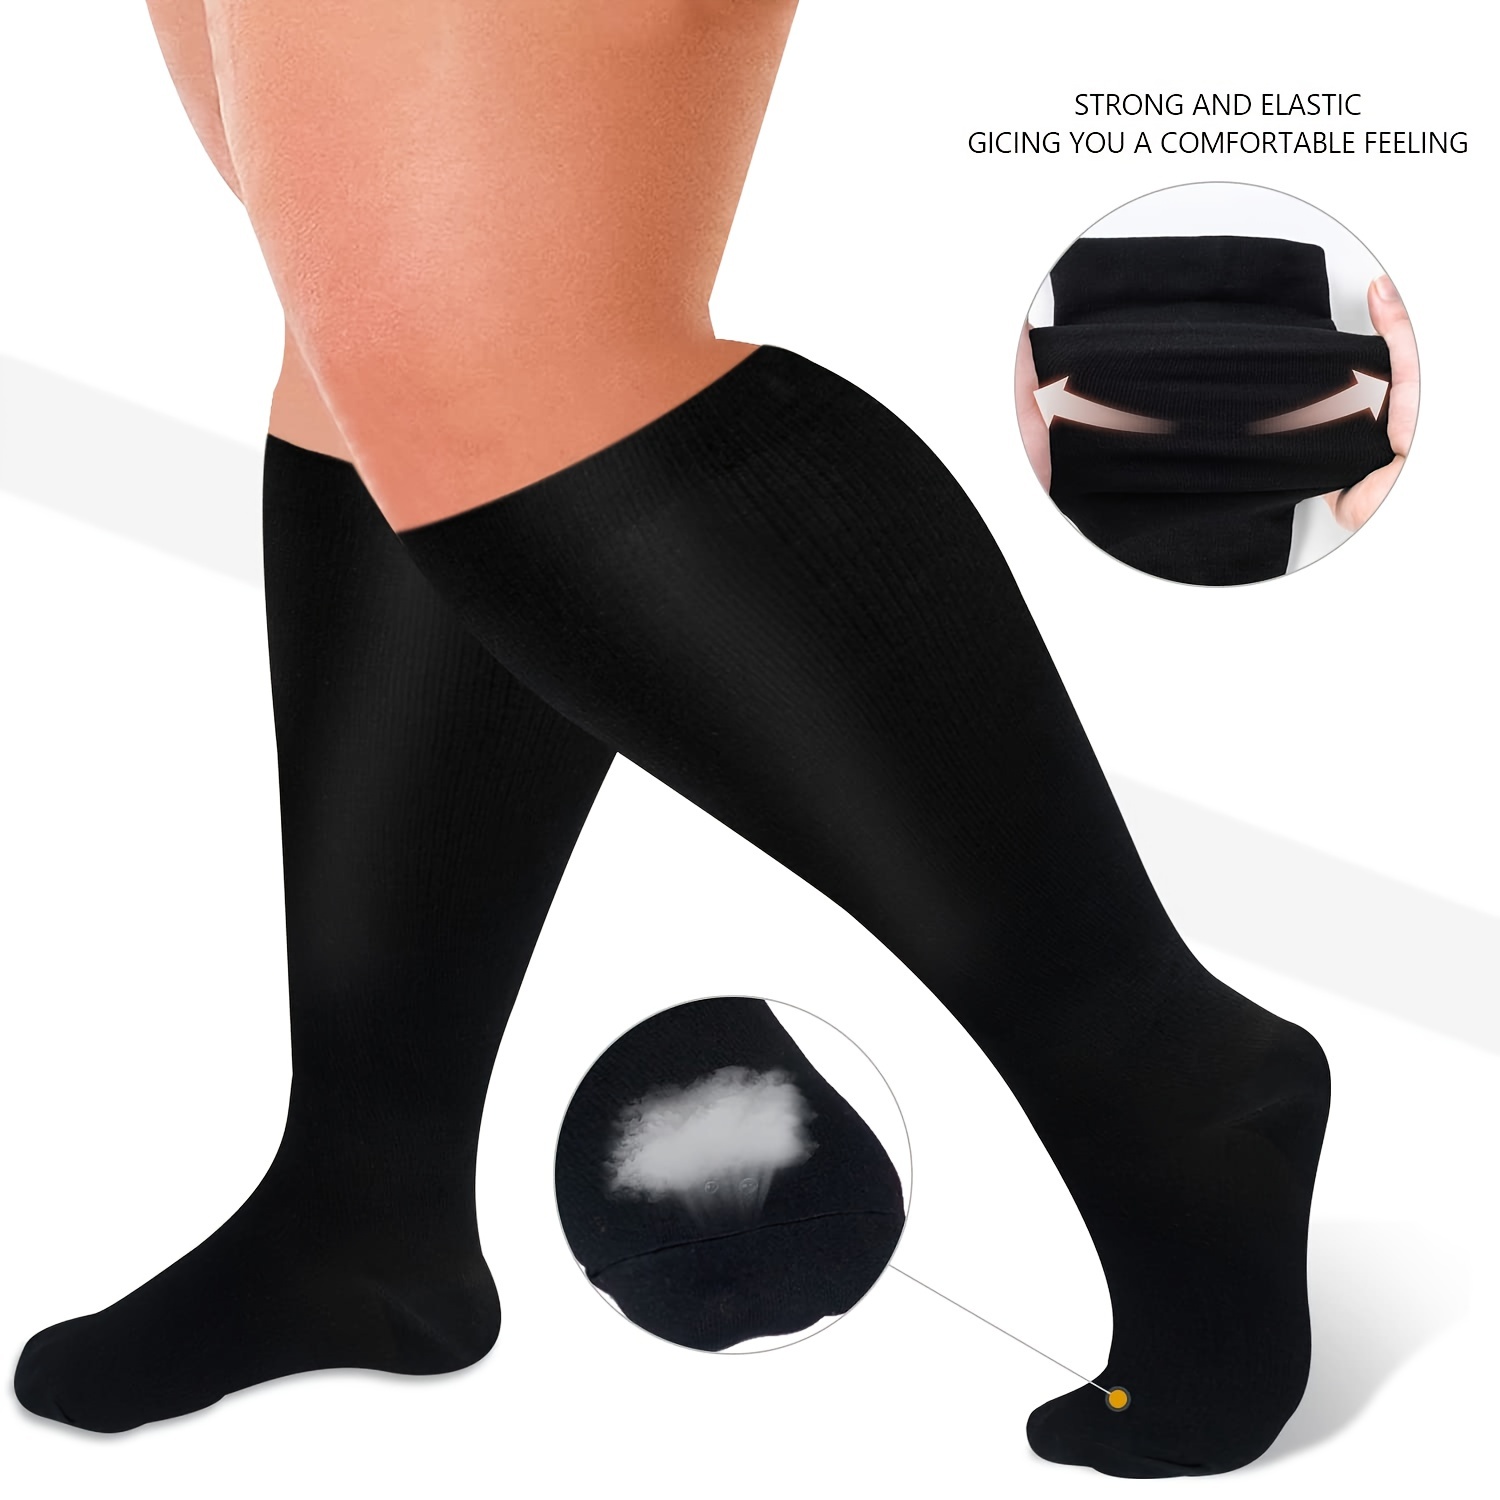 Black Compression Socks for Healthcare Workers